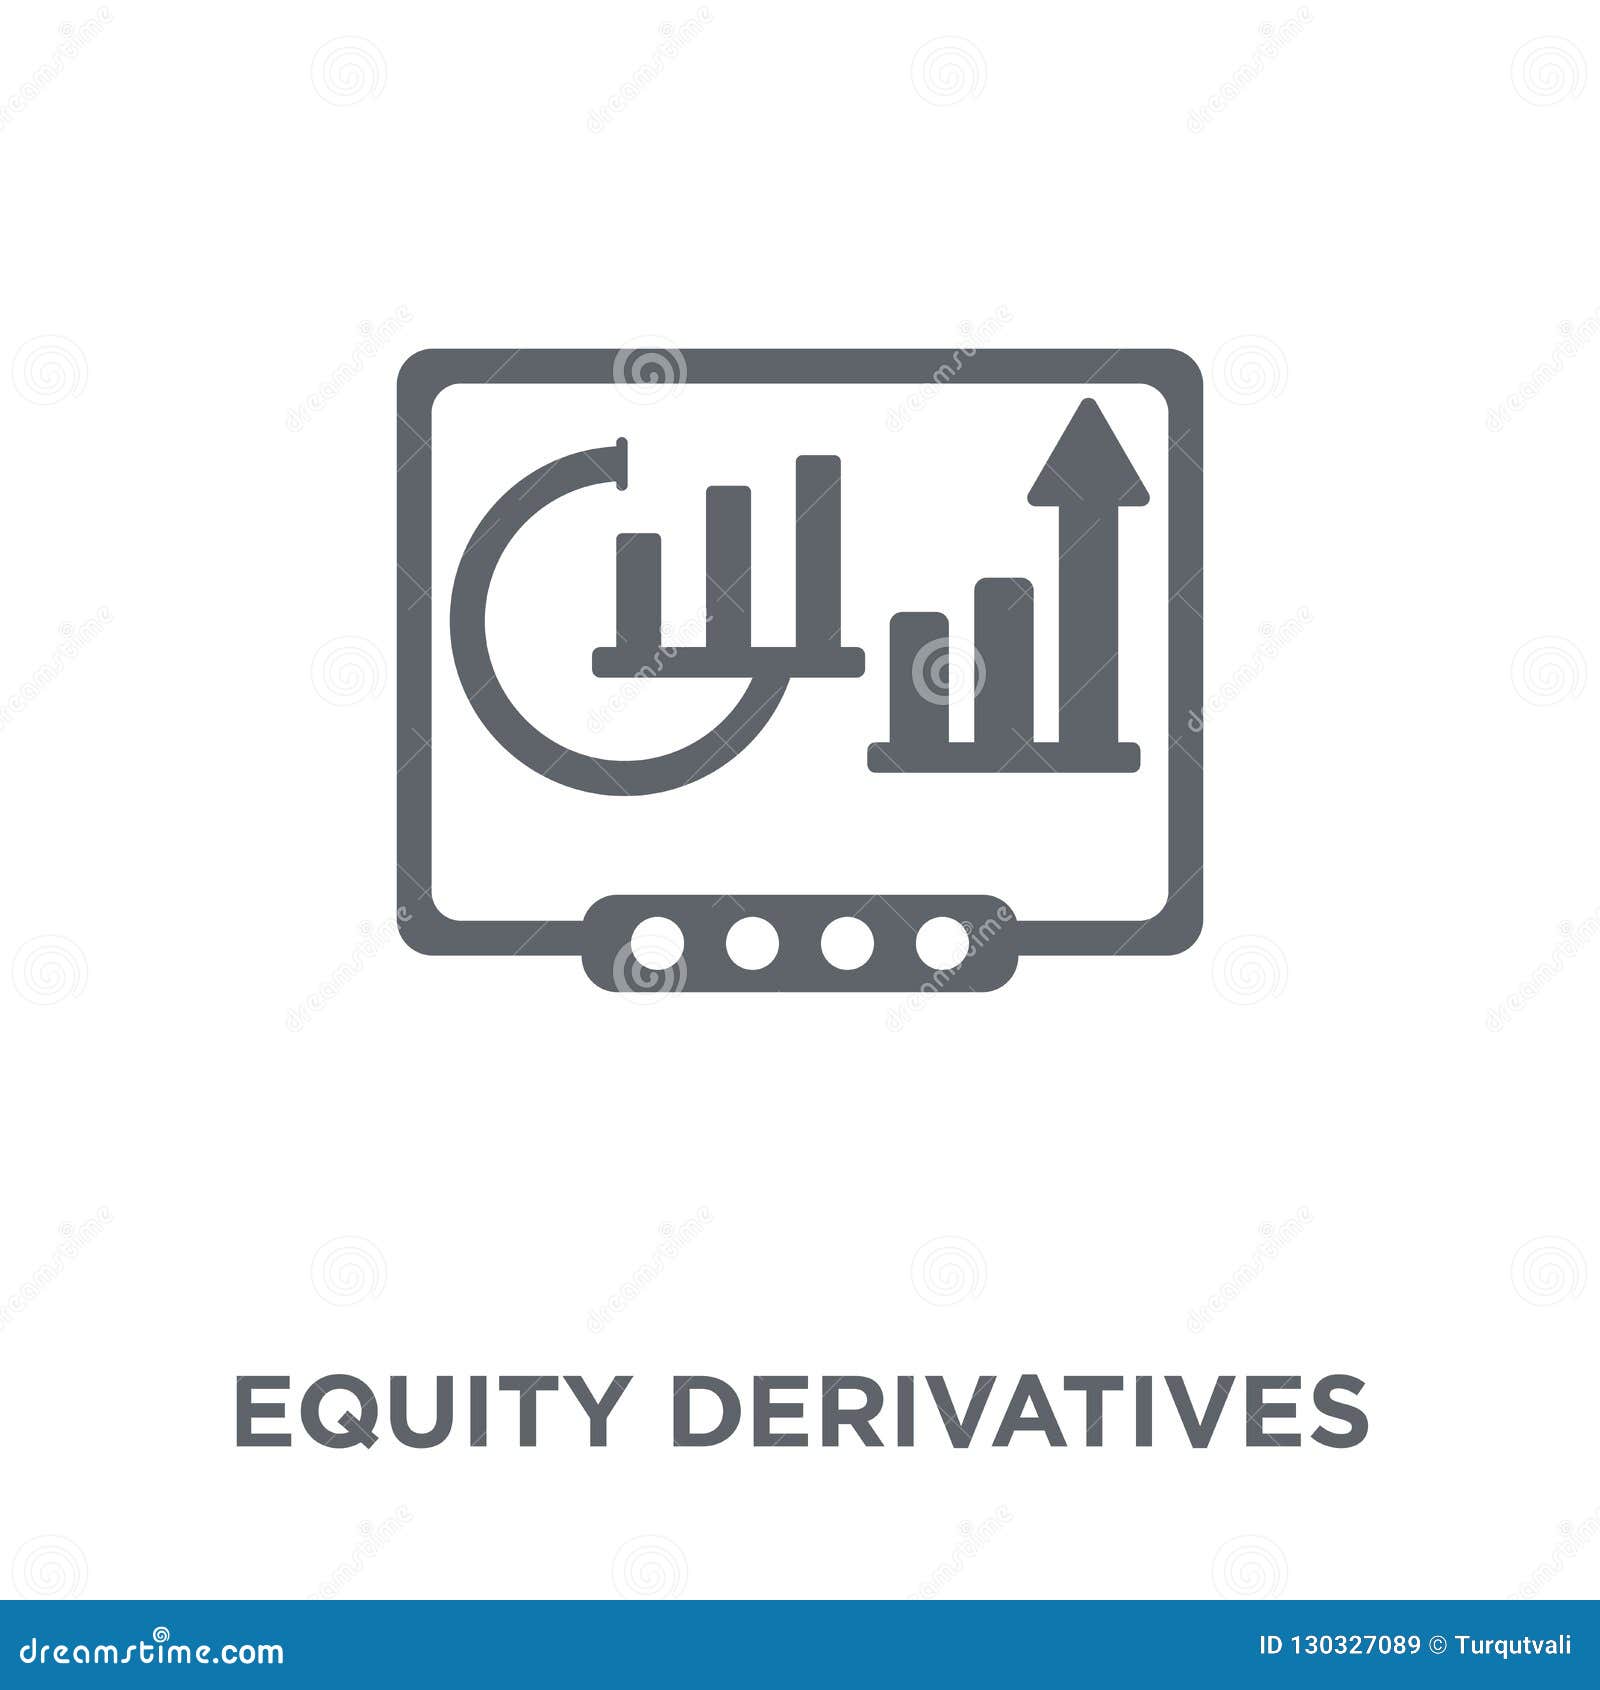 equity derivatives icon from equity derivatives collection.